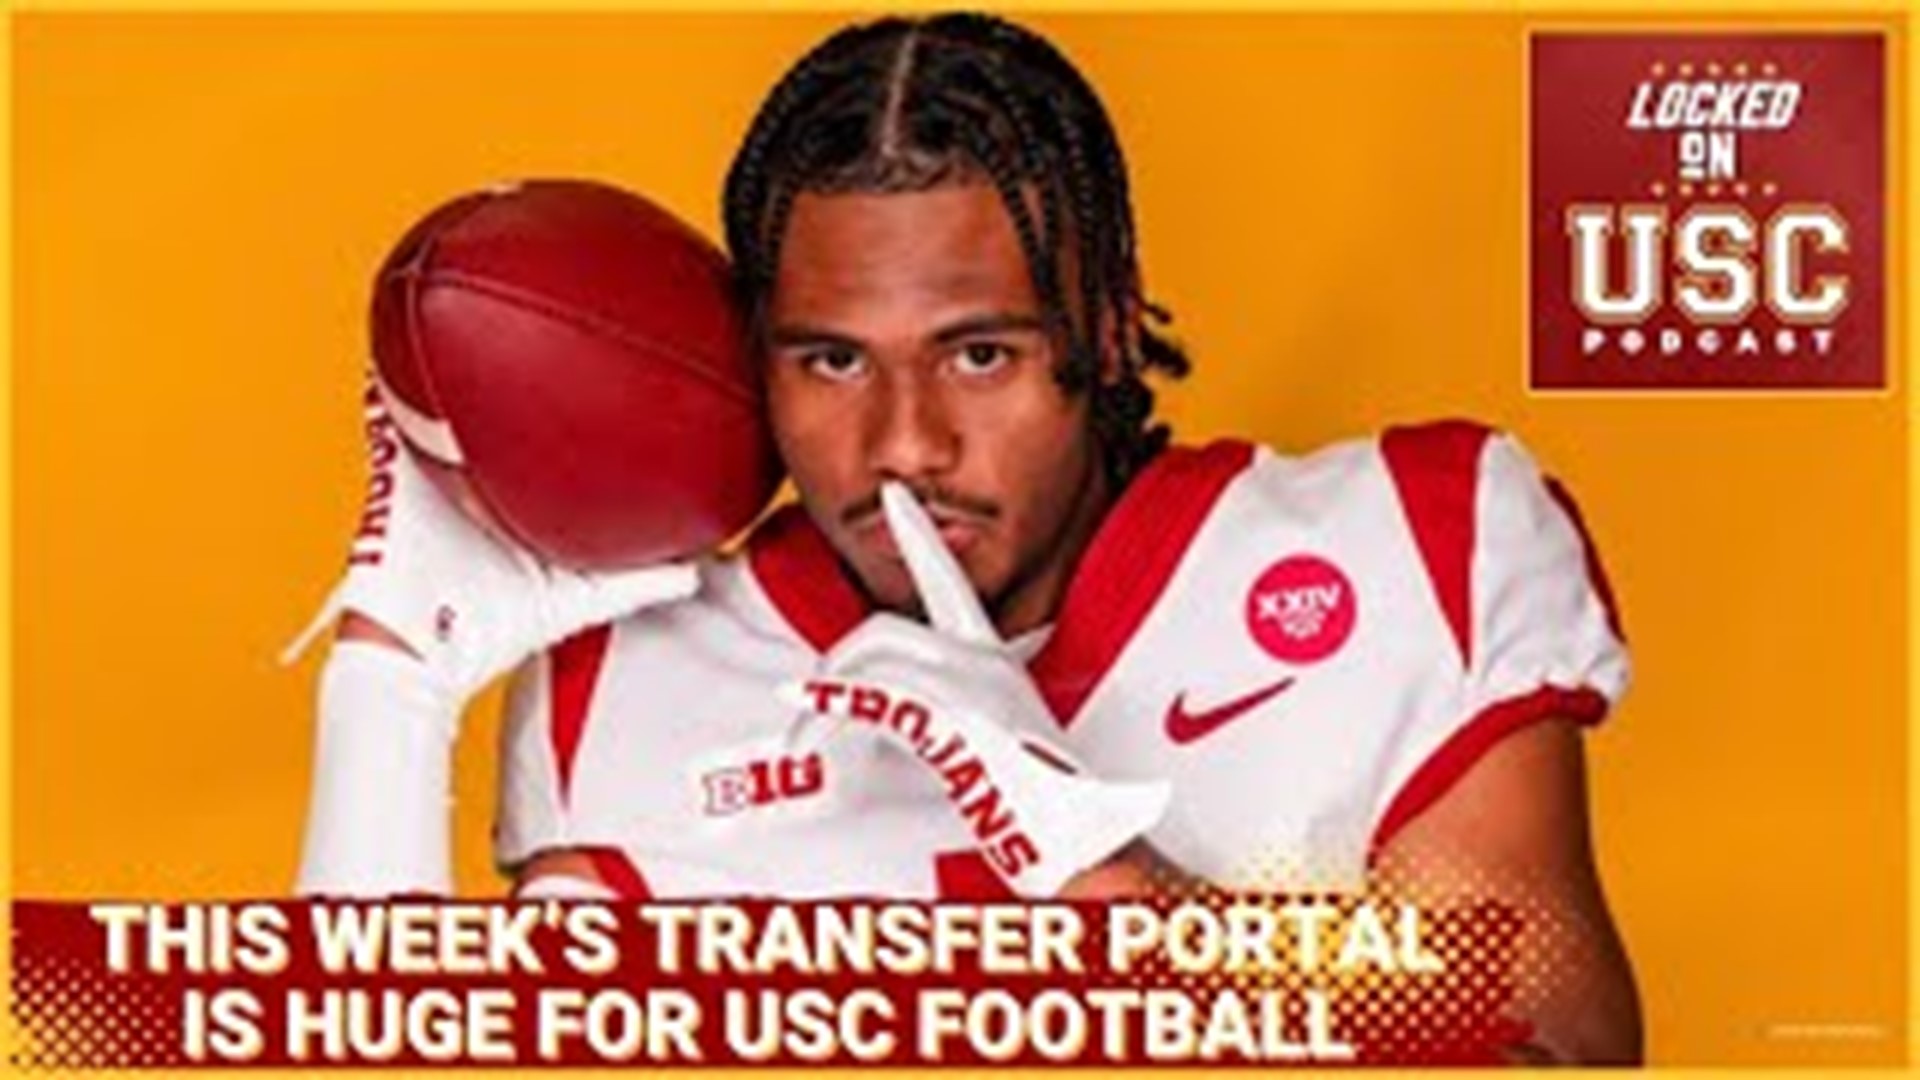 This Is A Massive Transfer Portal Week For USC